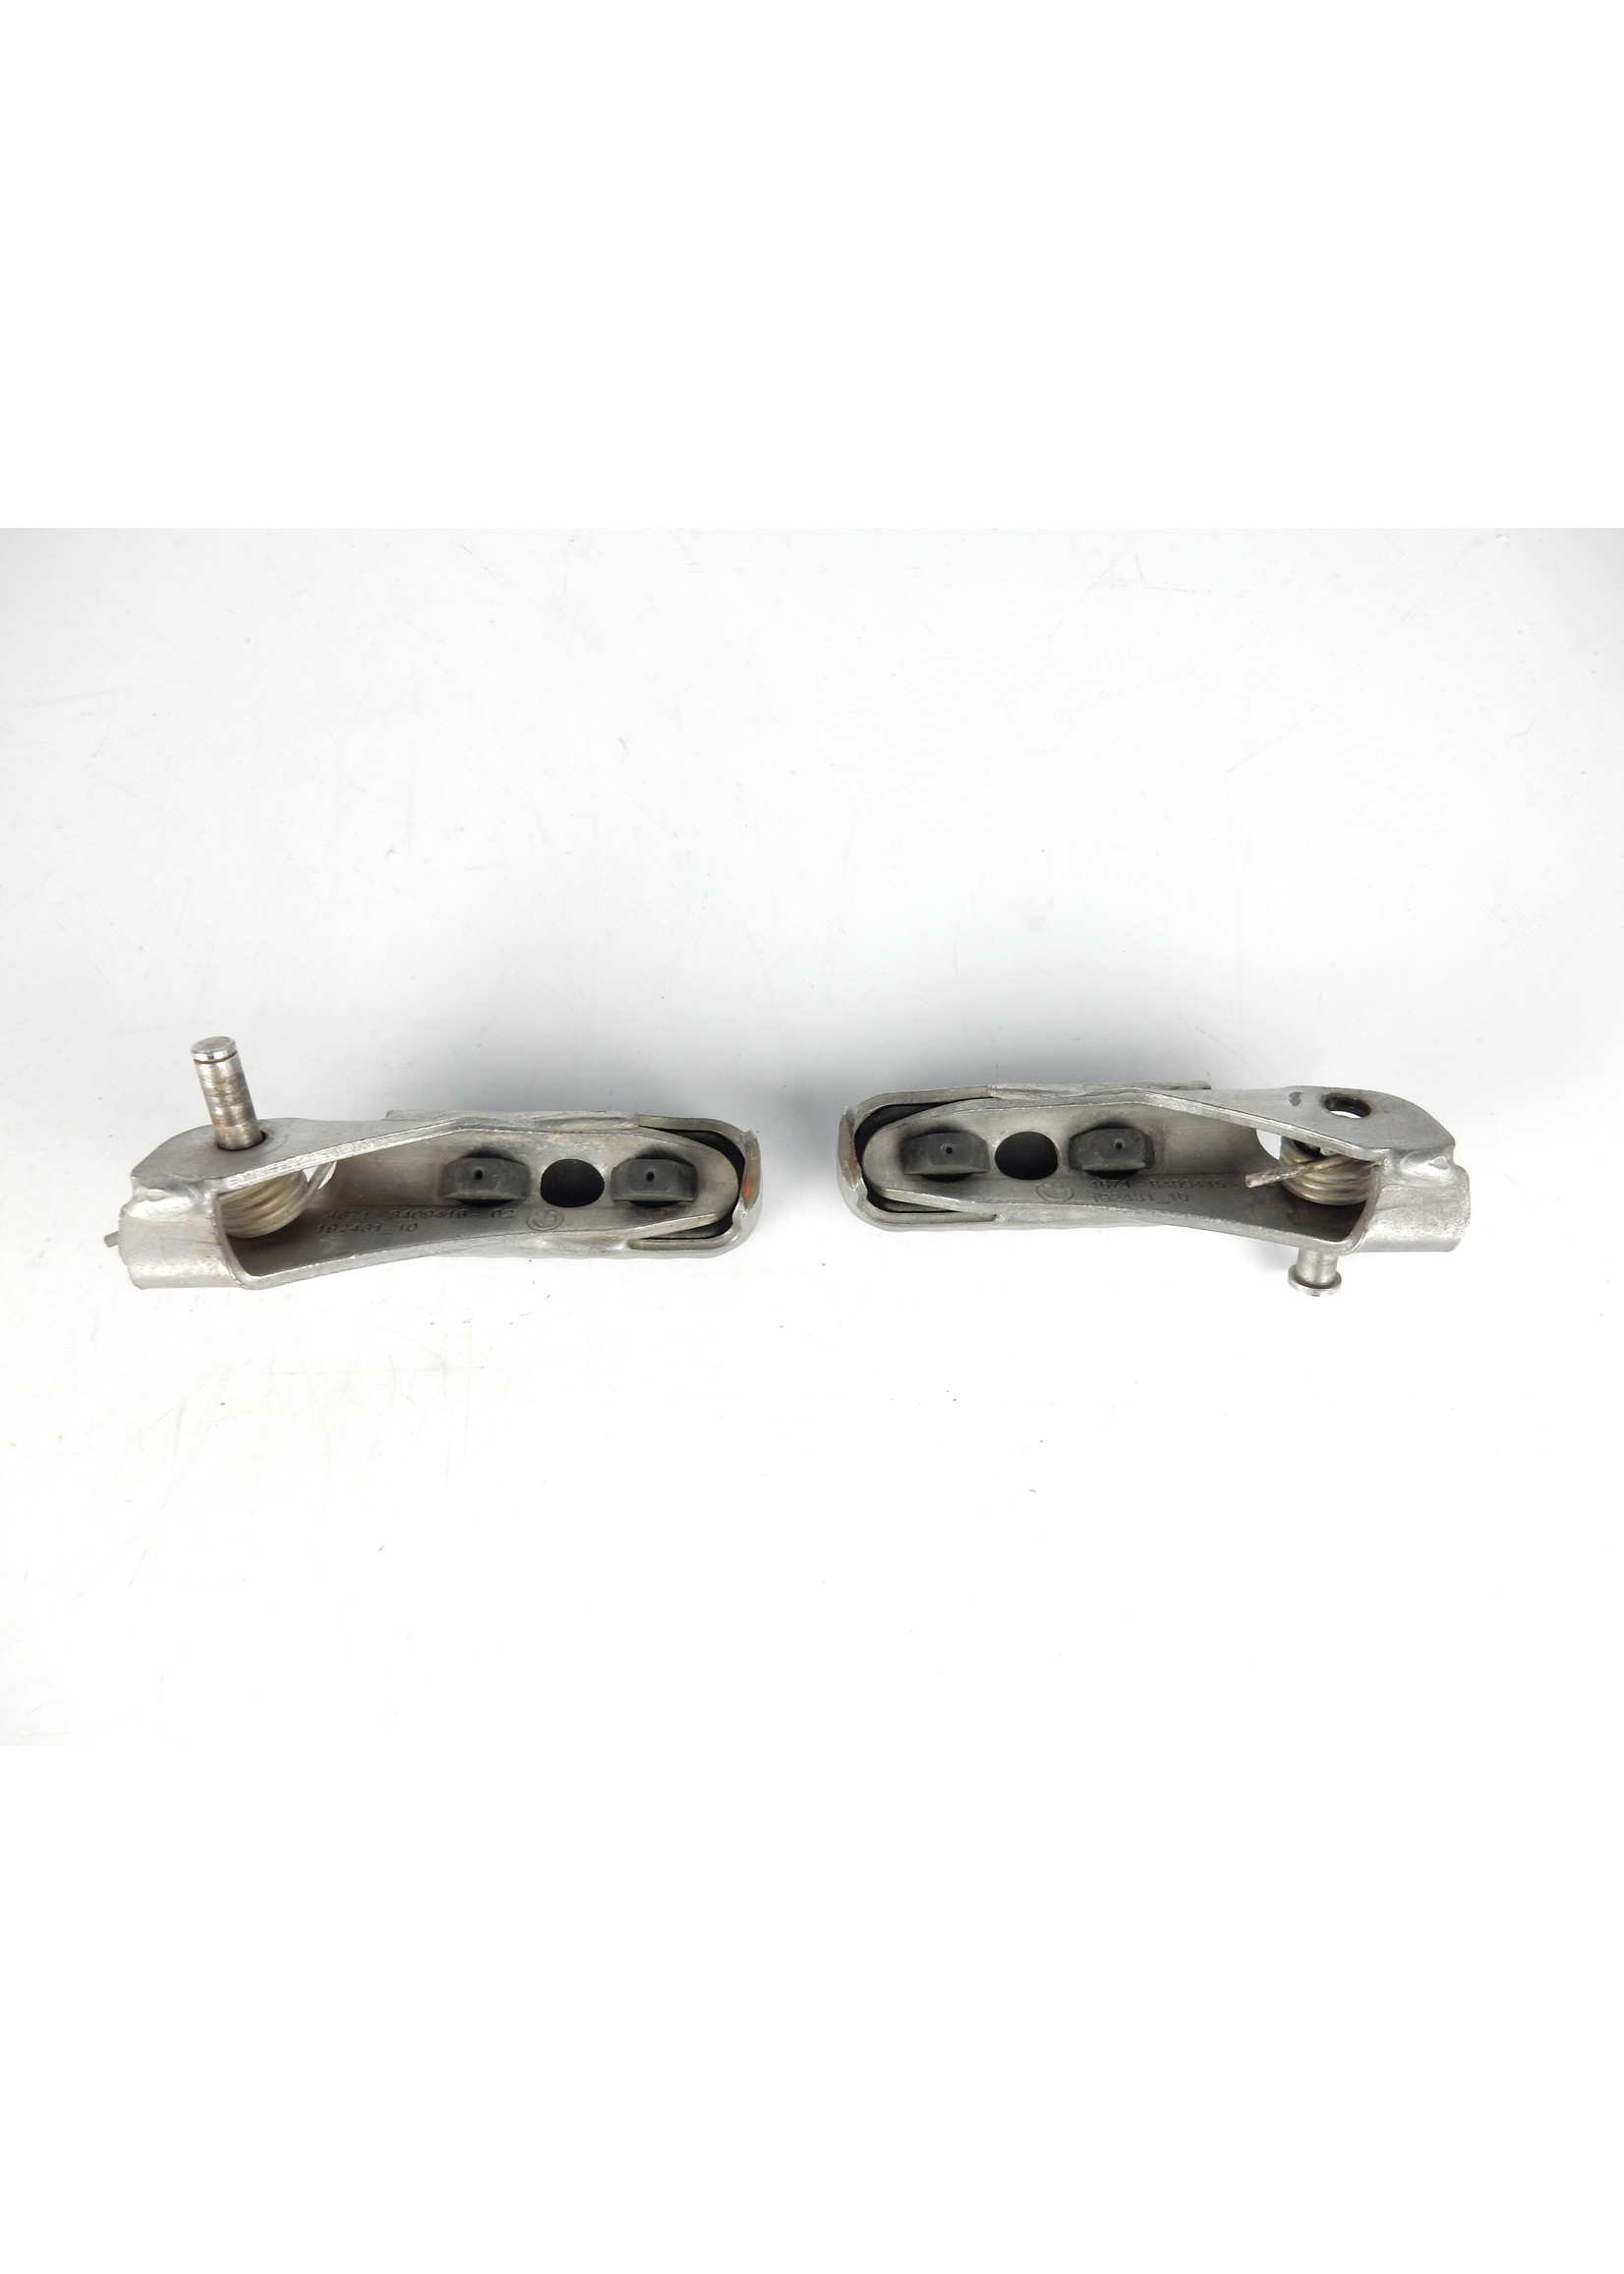 BMW BMW F 850 GS Footrest, left / Footrest, right / Footrest rubber / 46718409415 / 46718409416 / 46718530633